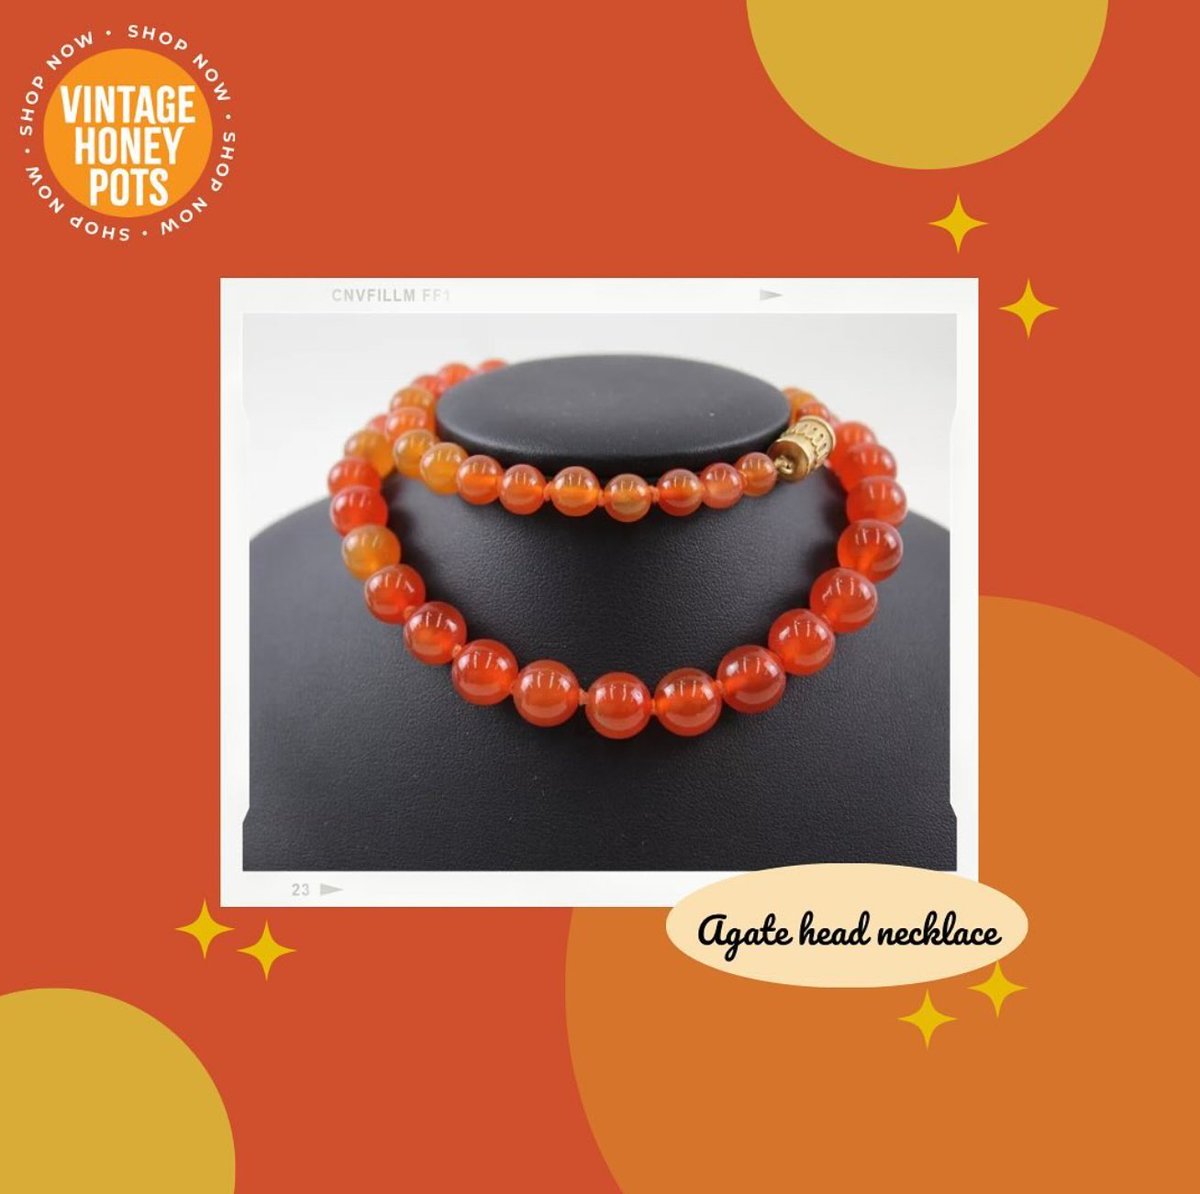 Did you know we are now offering ‘Buy-It-Now’ lots on eBay? We have some beautiful jewellery items available to buy now!💎 Including this amazing 18ct clasped agate bead necklace🧡

ebay.co.uk/itm/1763392144…

#Jewellery #buyitnow #vintagelove #vintage #shopvintage